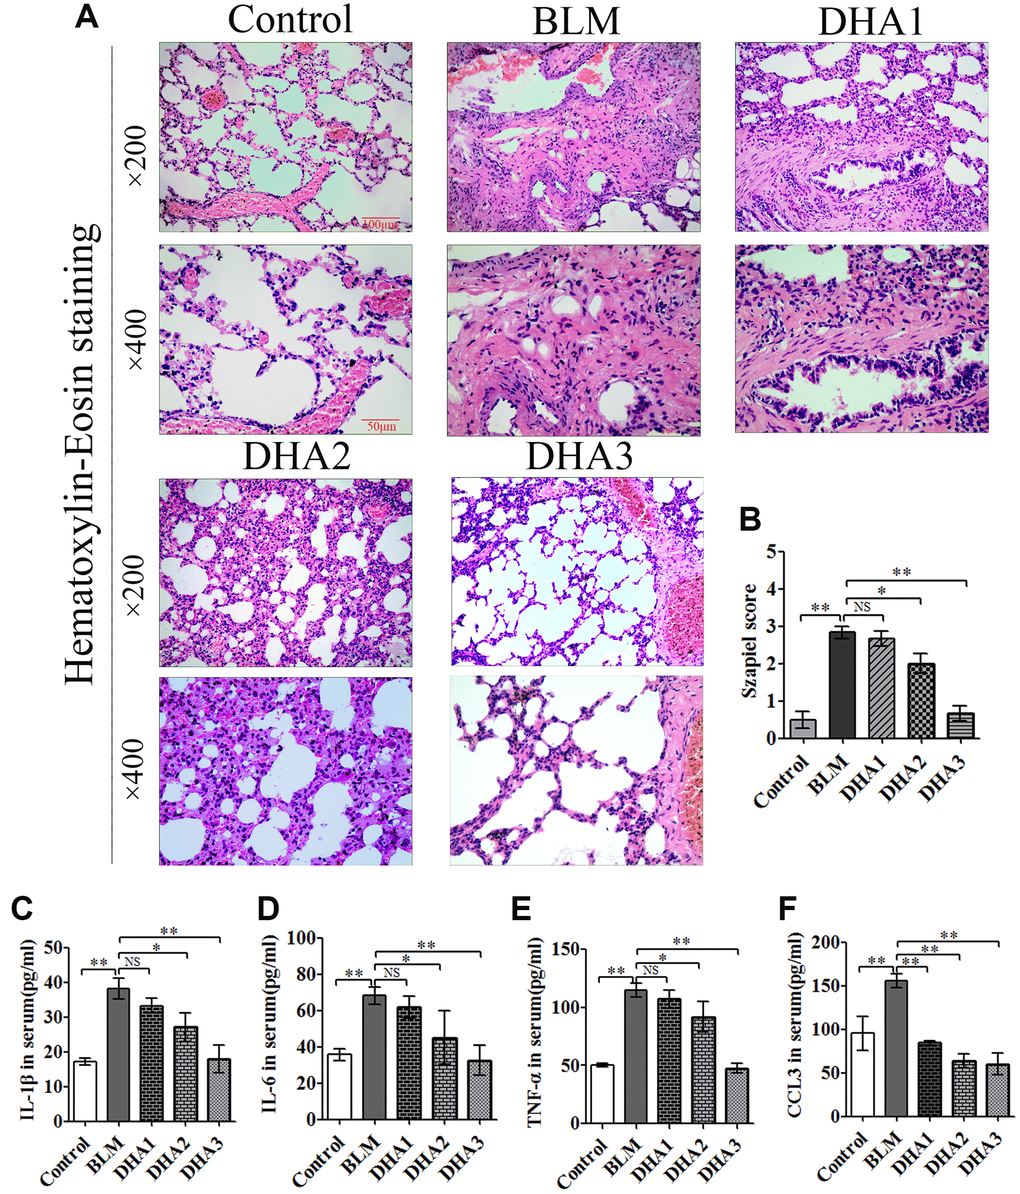 DHA reduces bleomycin-induced pulmonary fibrosis in rats. Rats were sacrificed at 28 days after the injection of bleomycin, with or without DHA treatment. Their blood and lungs were removed. (A) H&E staining of bleomycin-treated rat lungs, with and without DHA treatment. (B) Lung inflammation was scored (n = 6). (C) IL-1β, (D) IL-6, (E) TNFα, and (F) CCL3 protein in serum were determined using ELISA (n = 6). Data are expressed as the means ± standard error. *P **P 